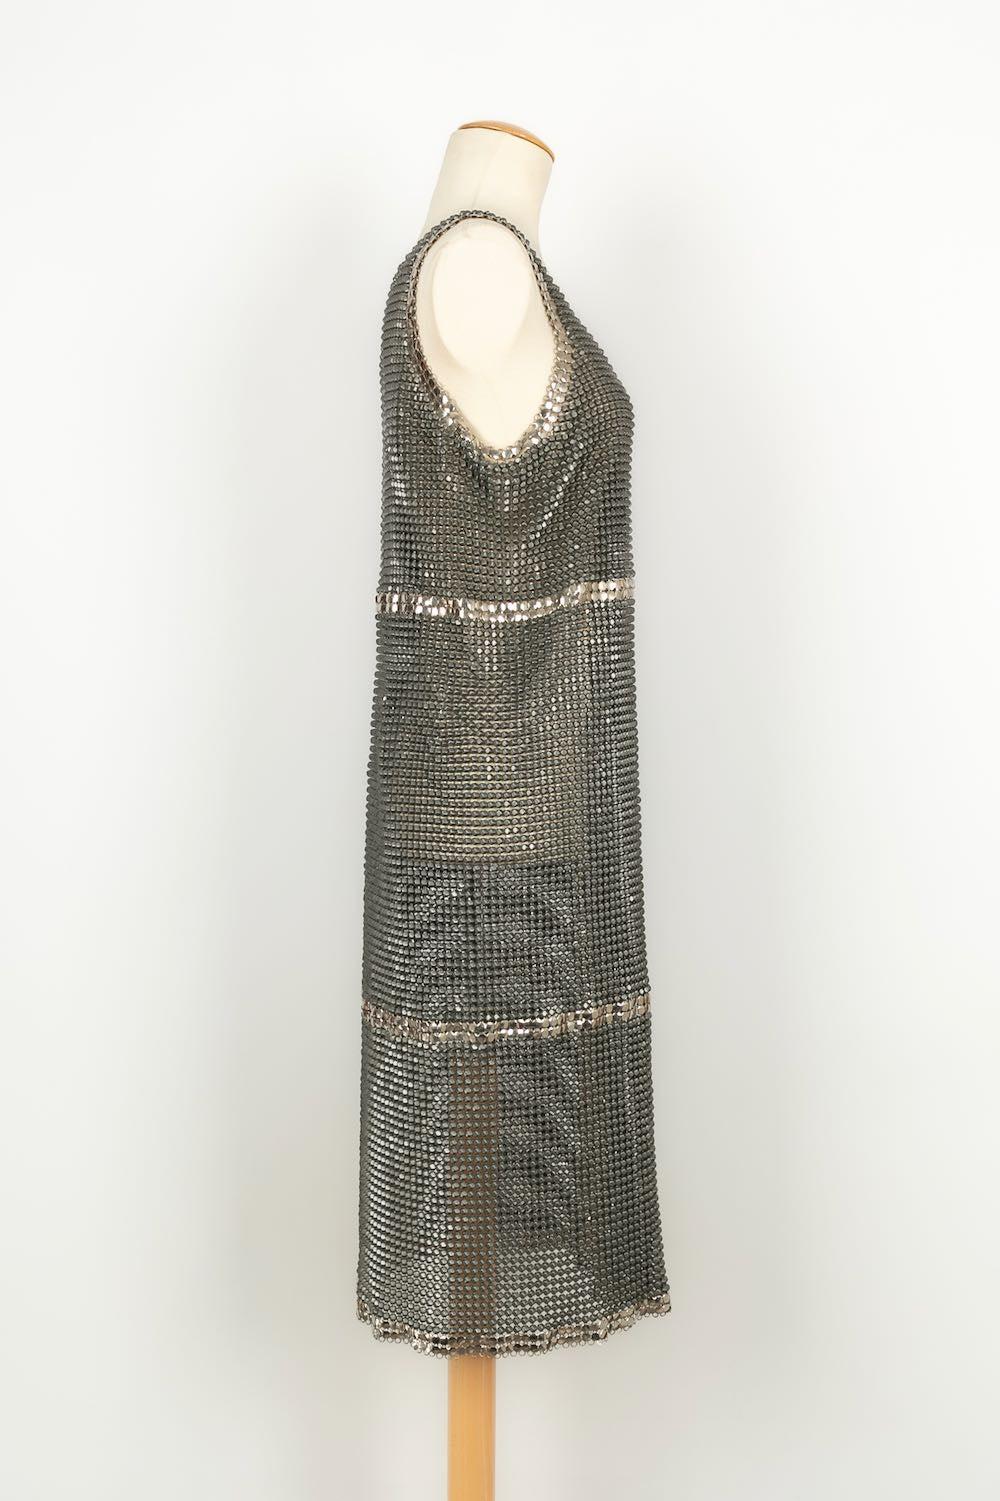 Paco Rabanne - Silver metallic mesh coat. No size or brand label, it fits a 36FR.

Additional information: 
Dimensions: Chest: 44 cm, Length: 106 cm
Condition: Very good condition
Seller Ref number: FV9